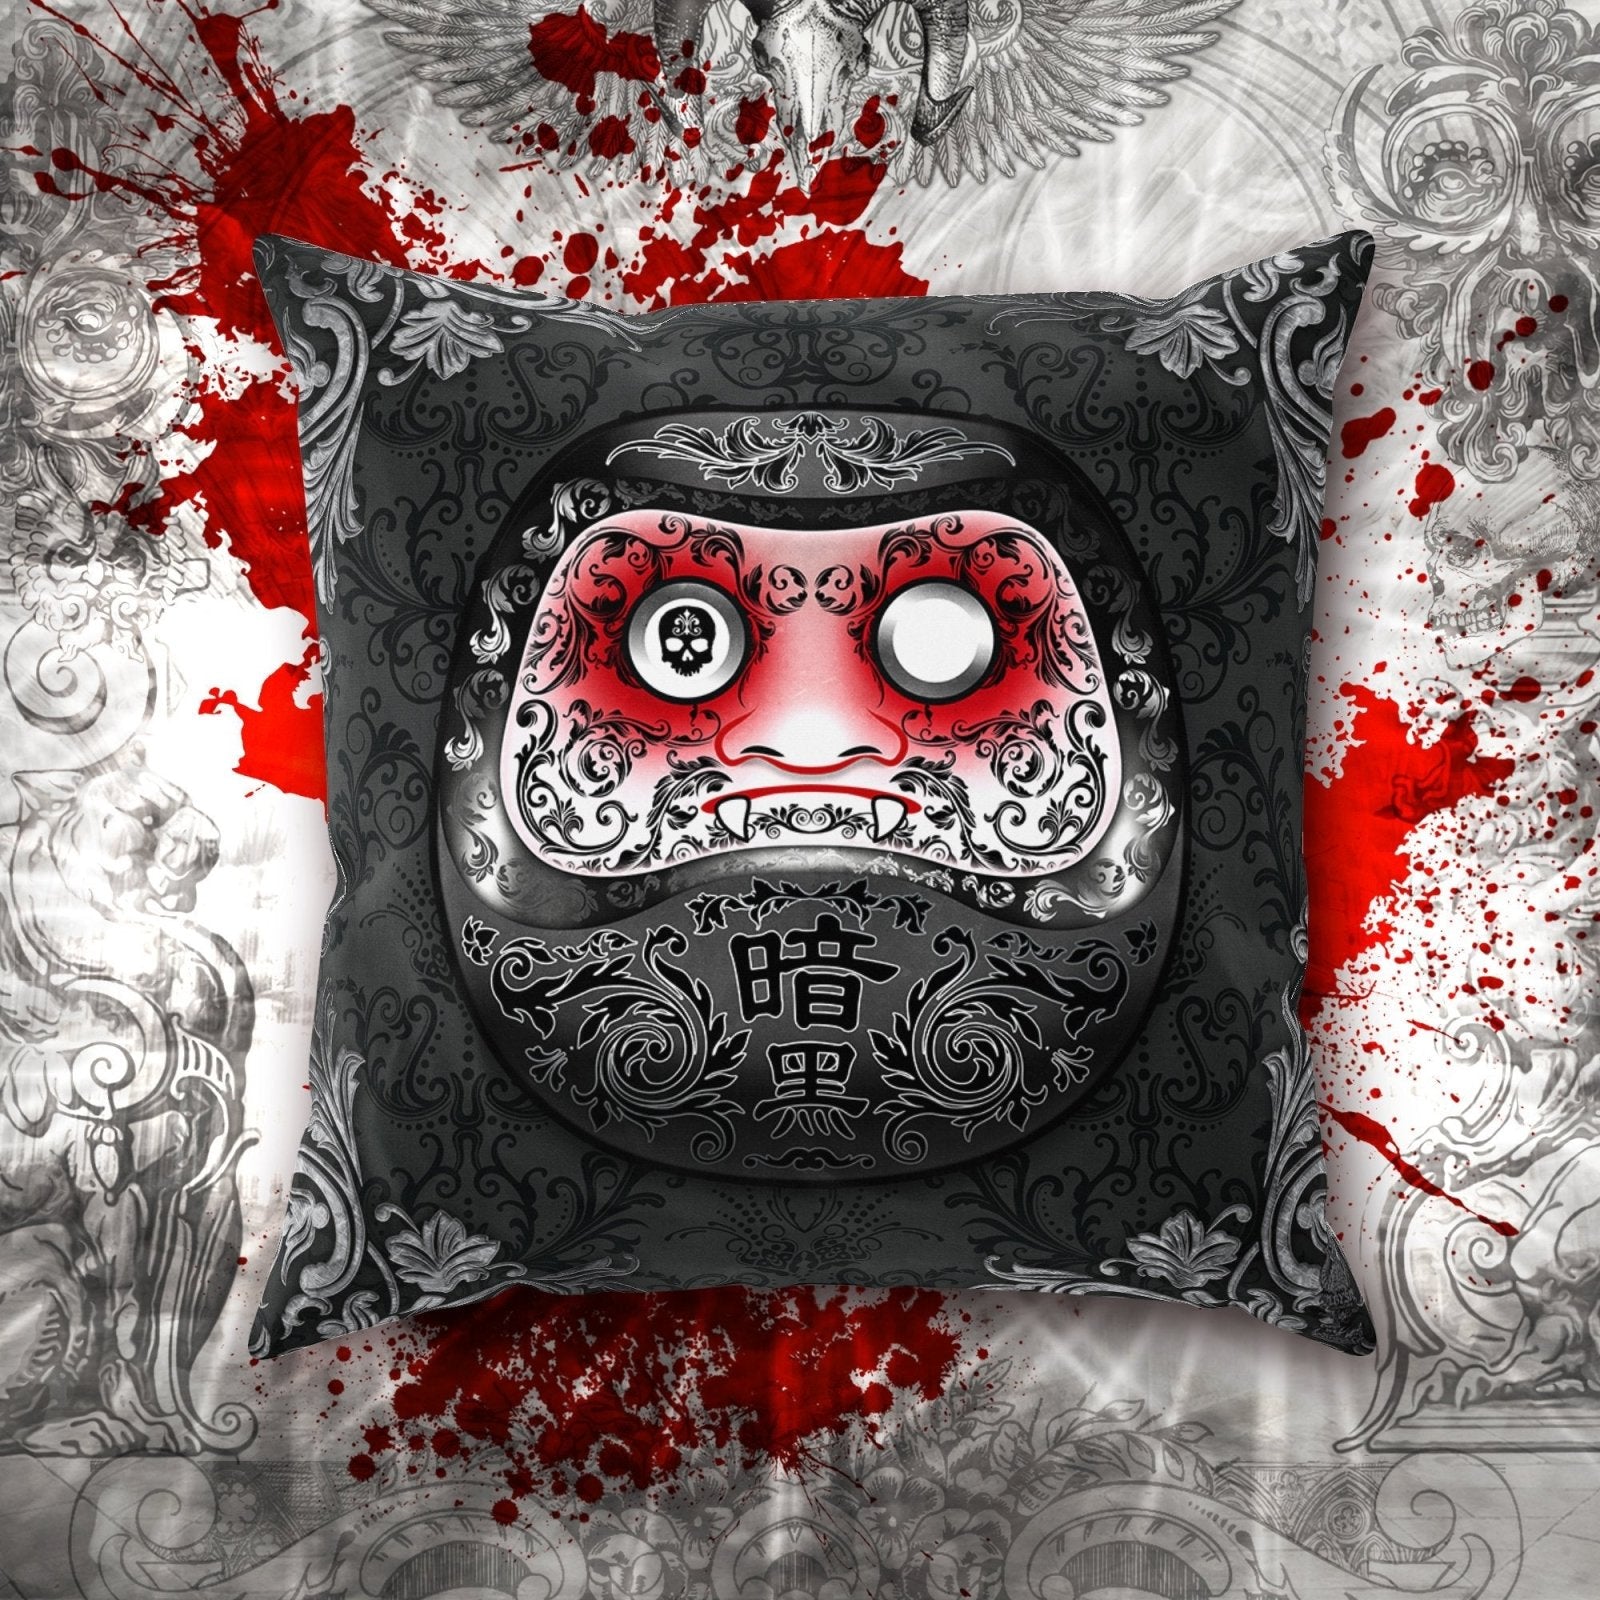 Daruma Throw Pillow, Decorative Accent Cushion, Funny Eclectic Japanese Room Decor, Alternative Home - Gothic, Vampire - Abysm Internal